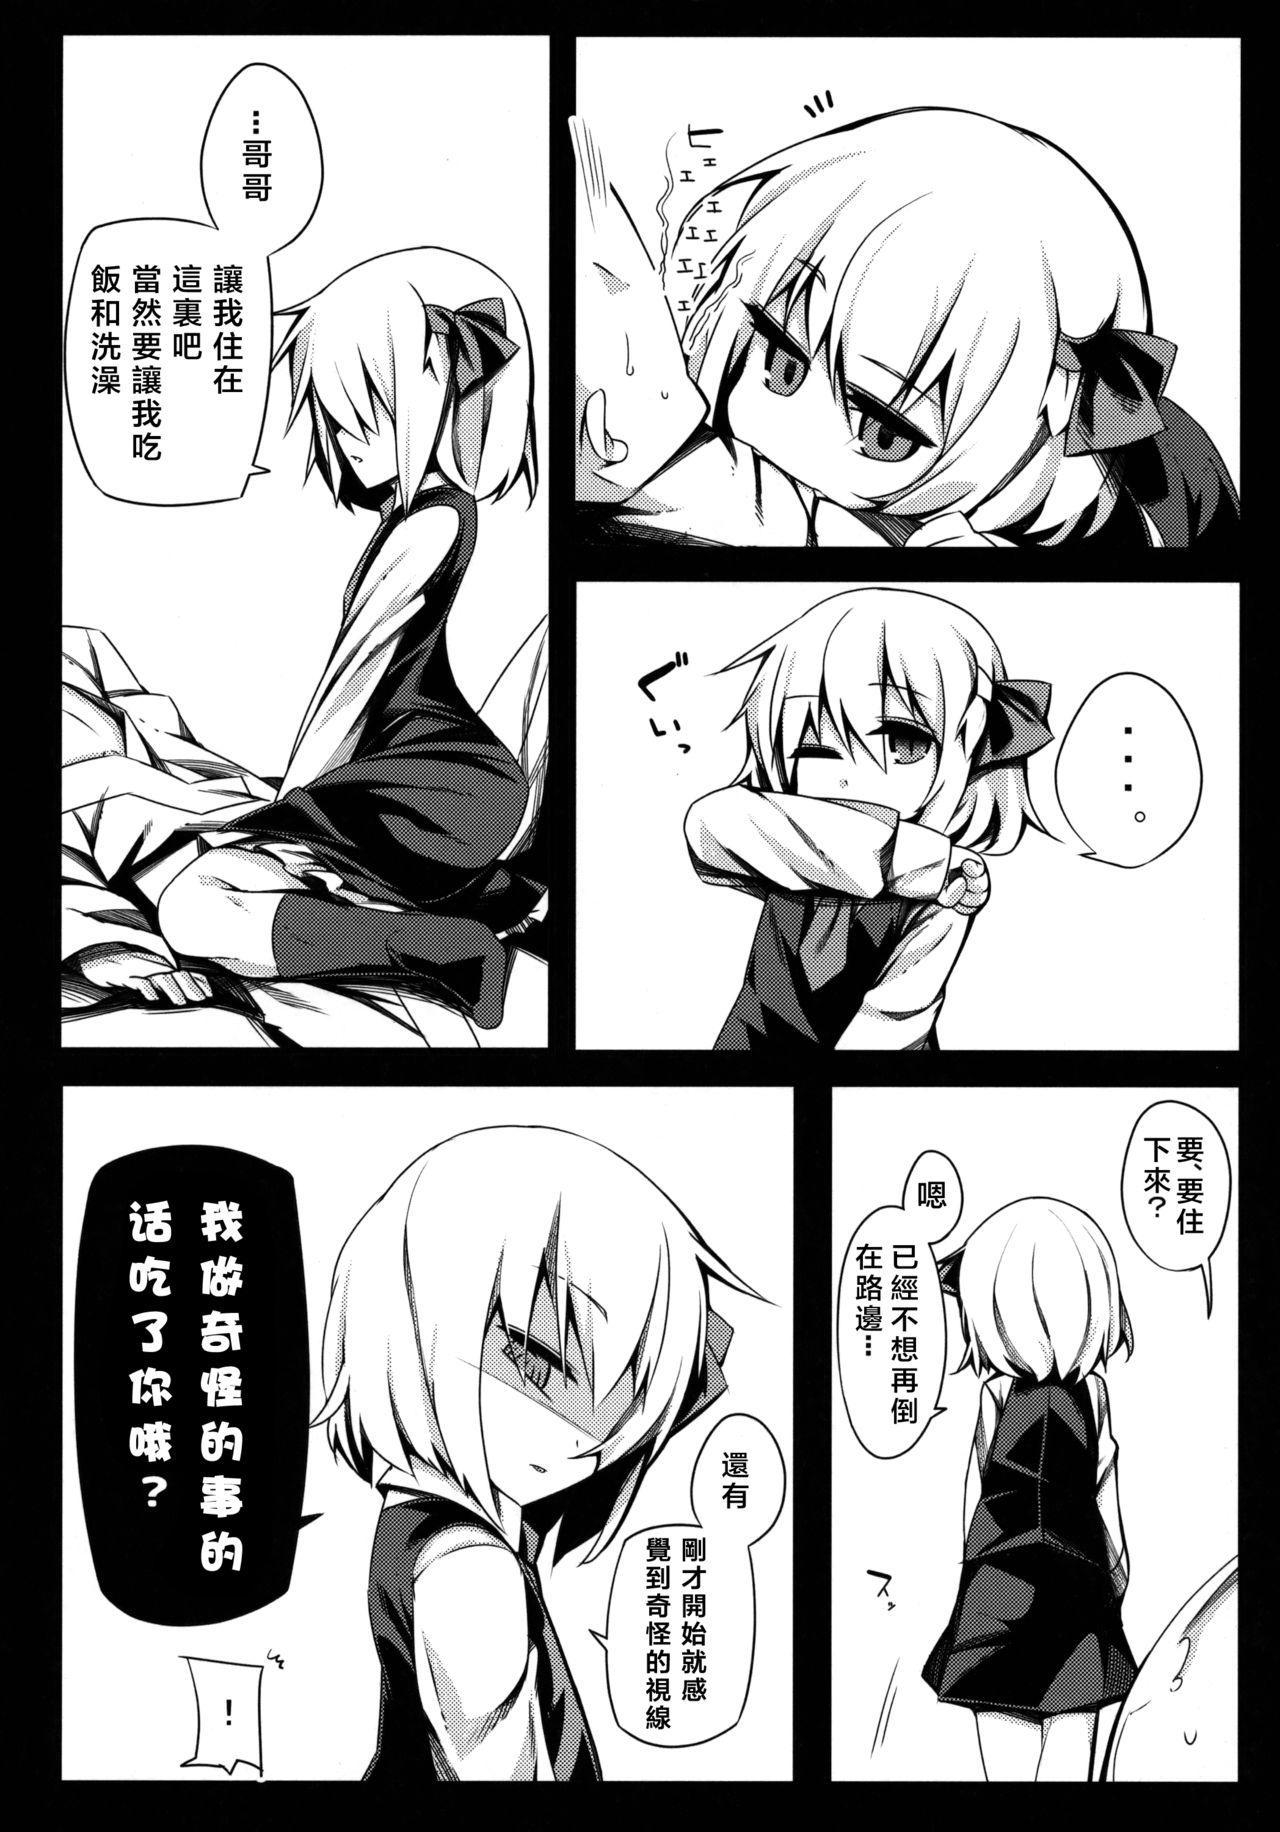 Dirty Talk Rumia Keiken +1 - Touhou project Teasing - Page 4